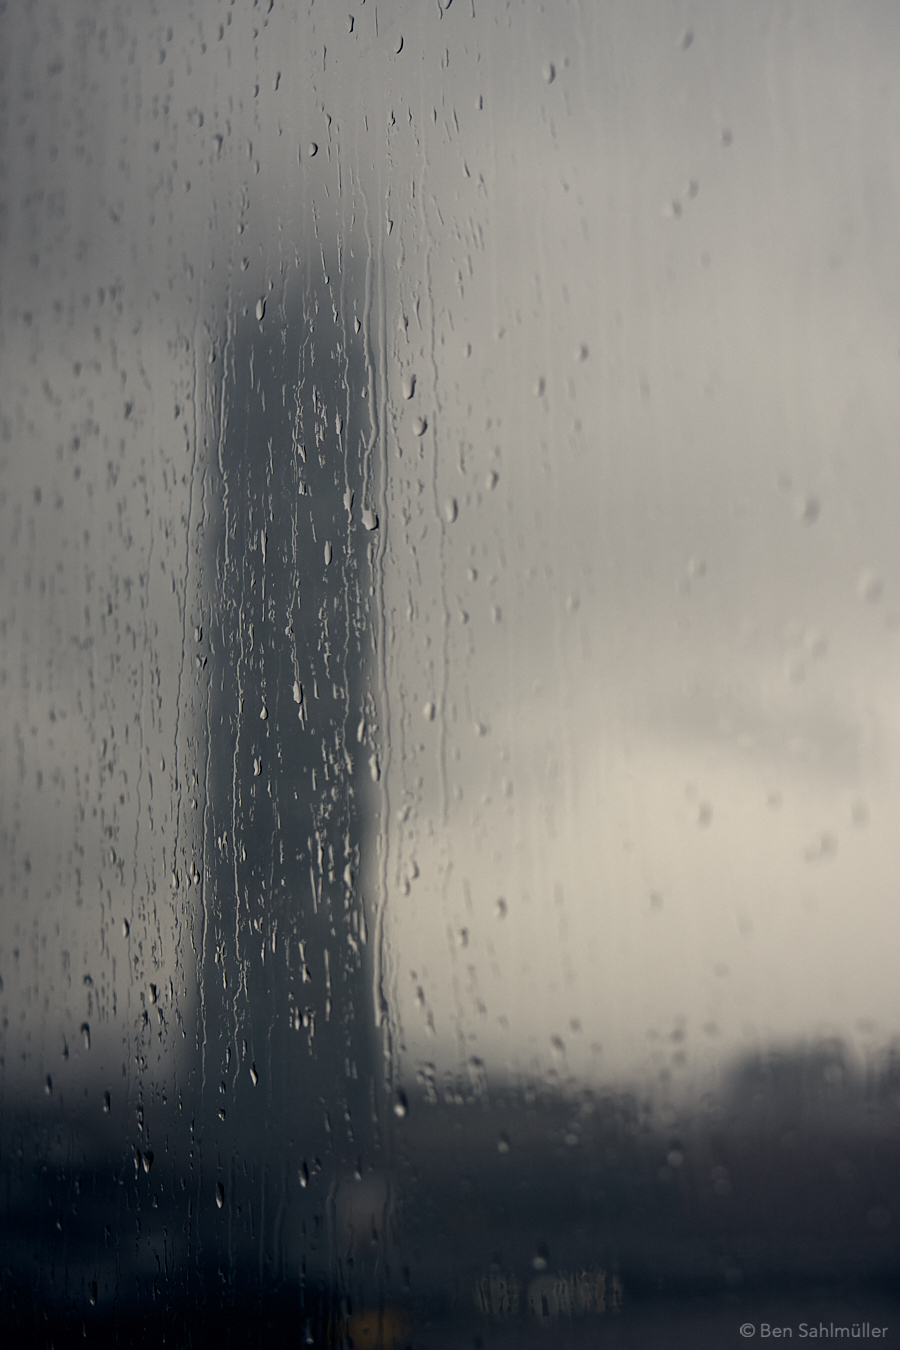 Taipei 101 as seen through a window glass. There are raindrops on the glass and the tower itself is just a dark silhouette.